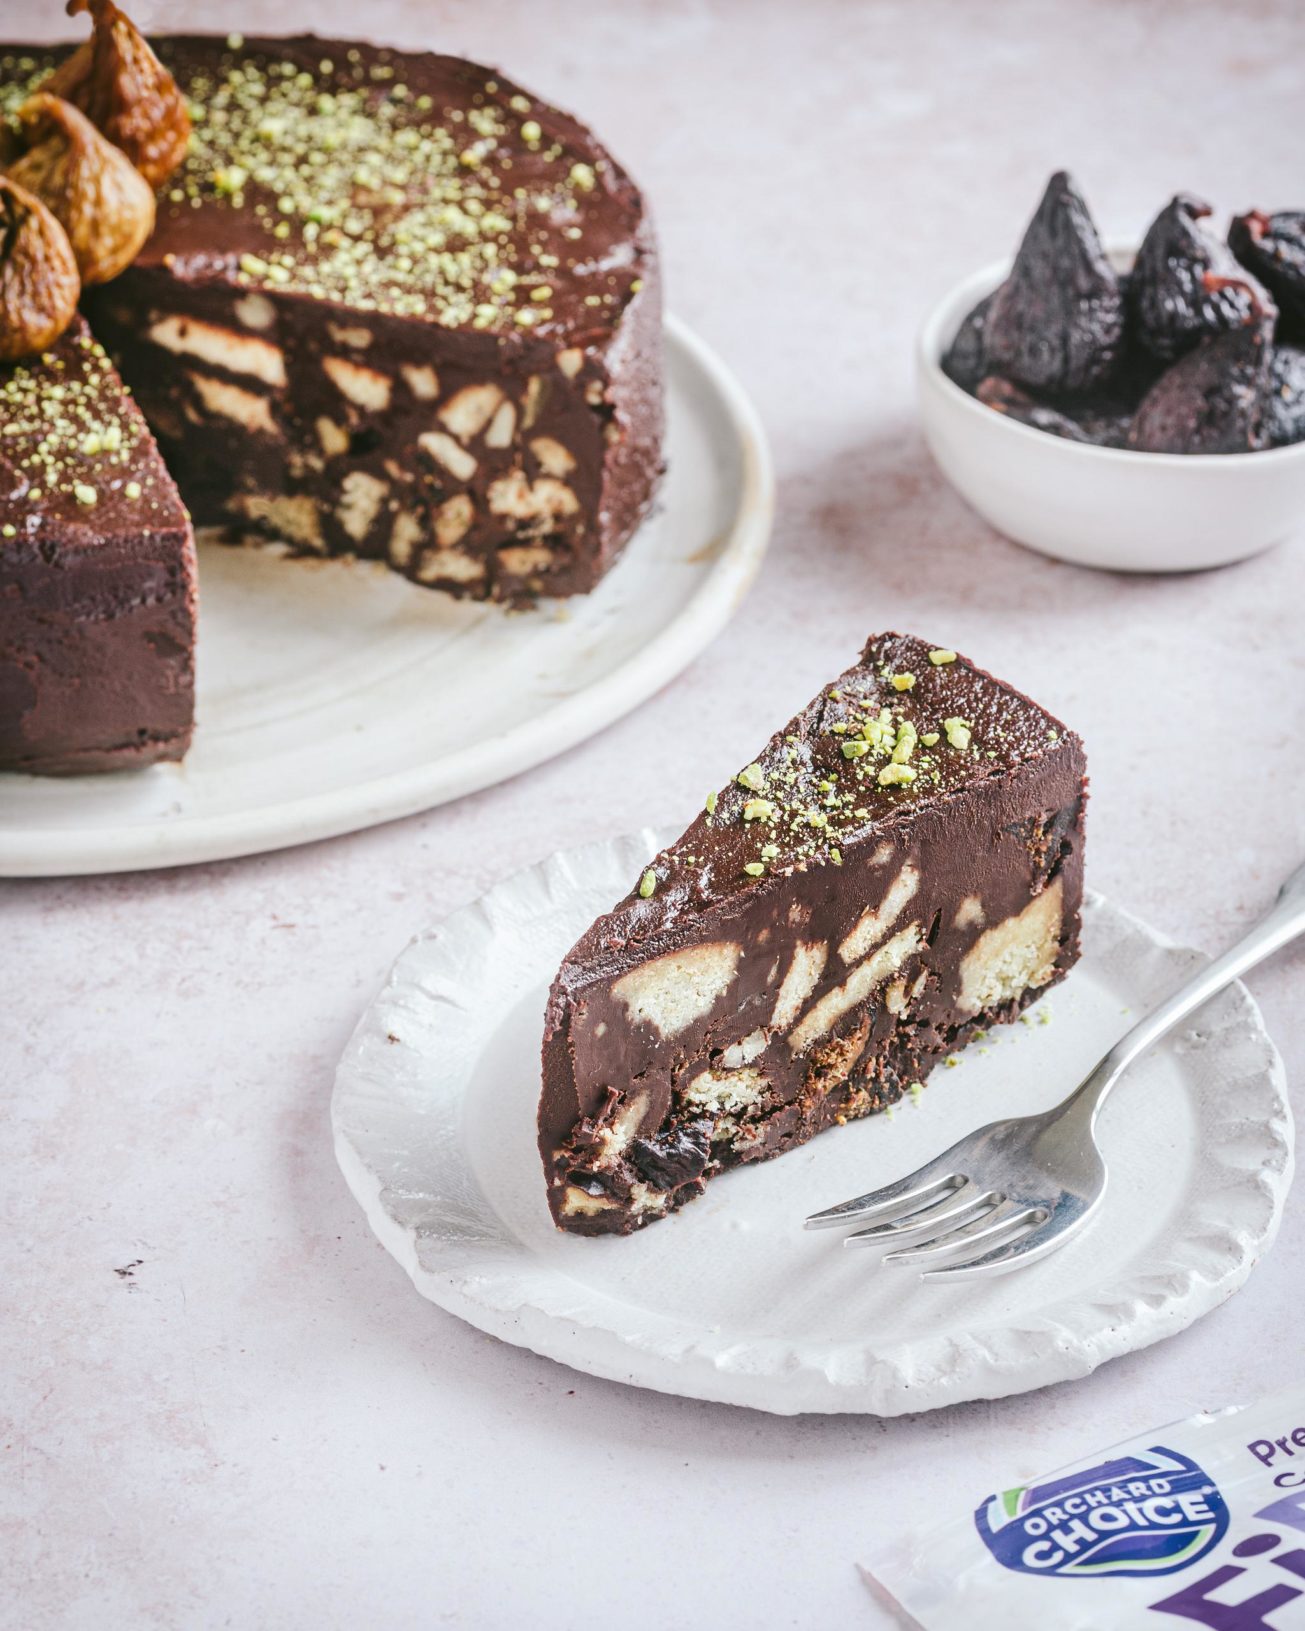 “Mosaic” No Bake Chocolate Cake Recipe with Biscuits & Figs